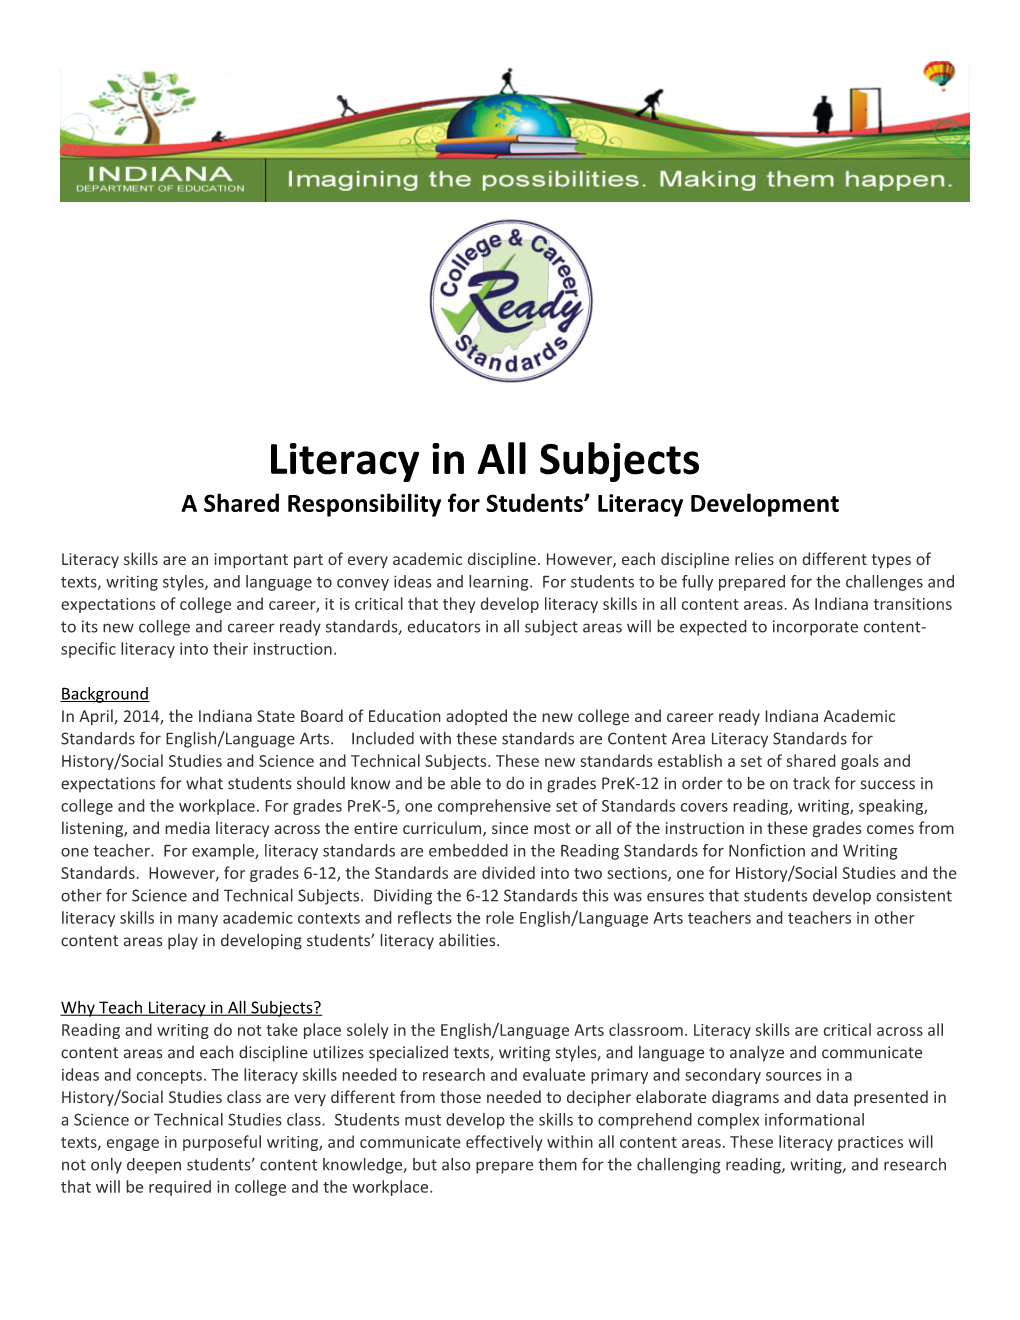 A Shared Responsibility for Students Literacy Development